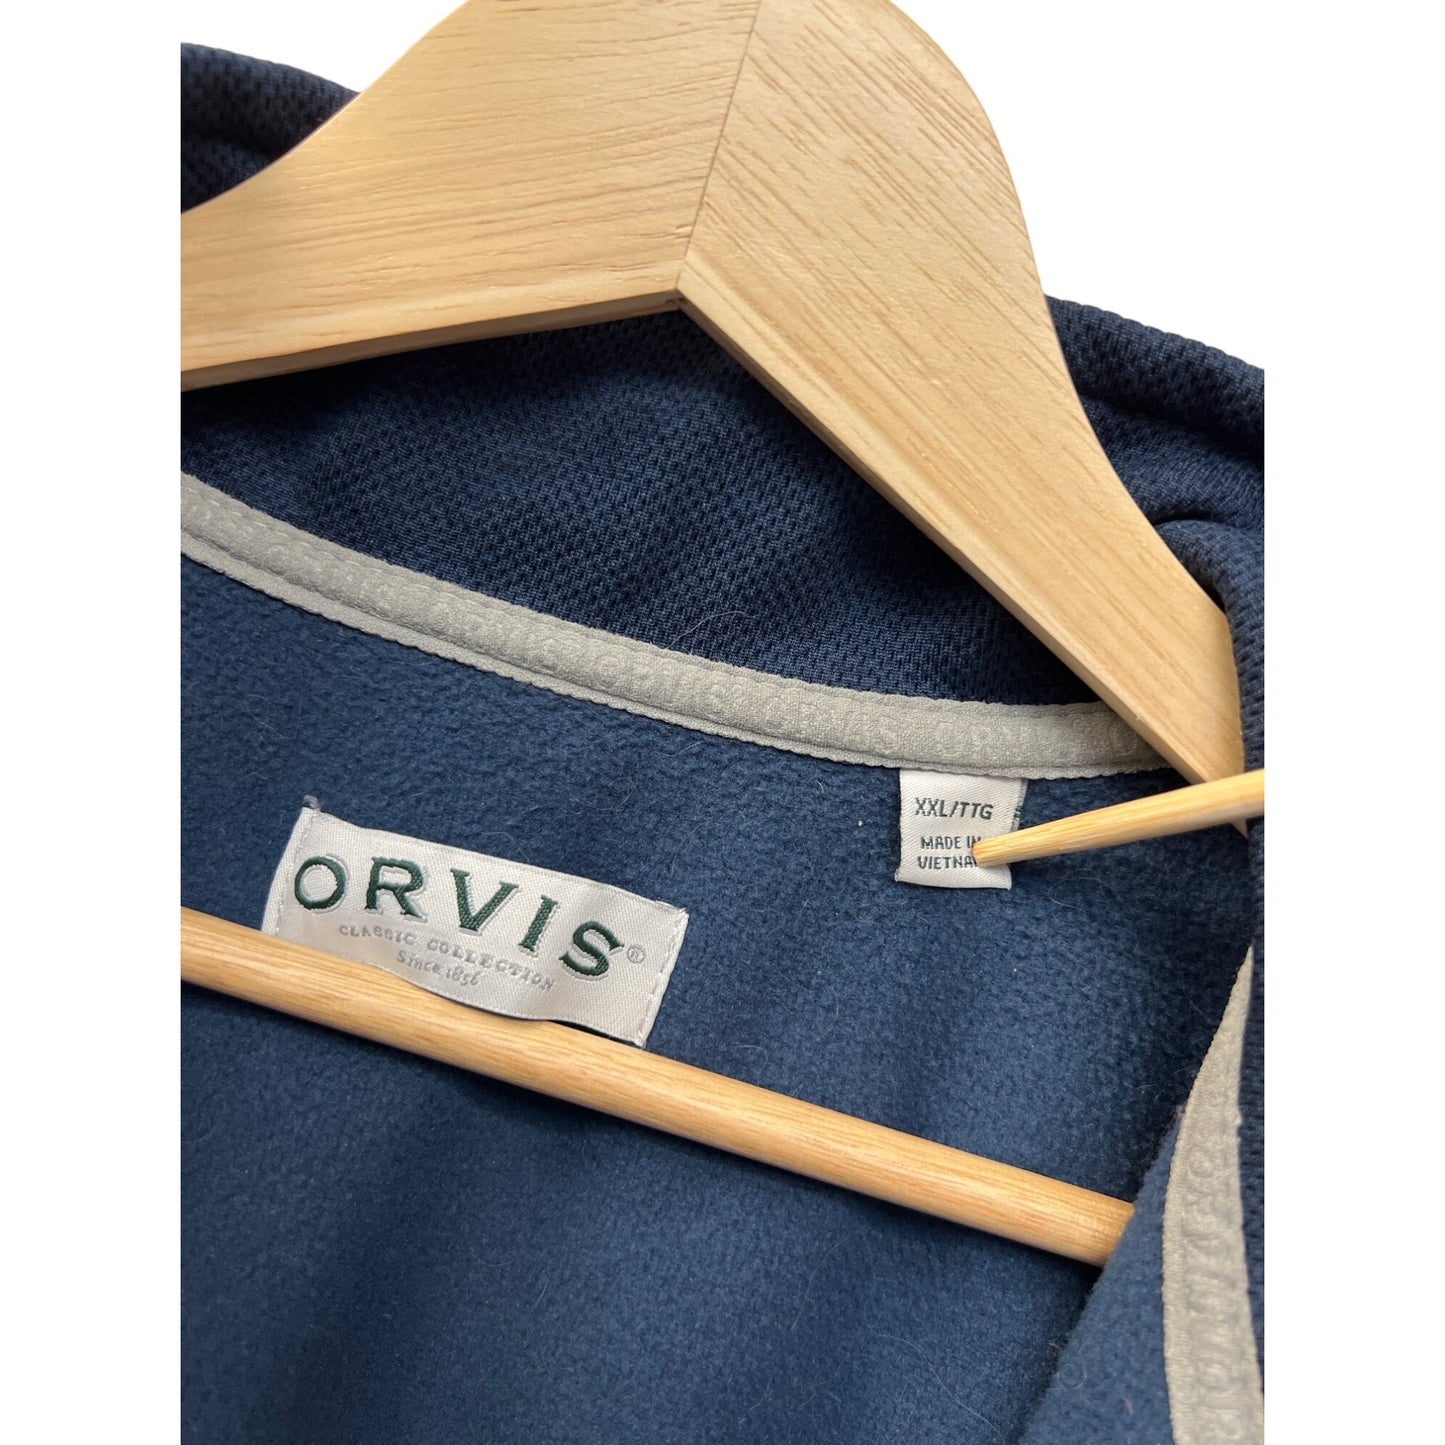 Orvis Full Zip Blue and Gray Soft Shell Jacket